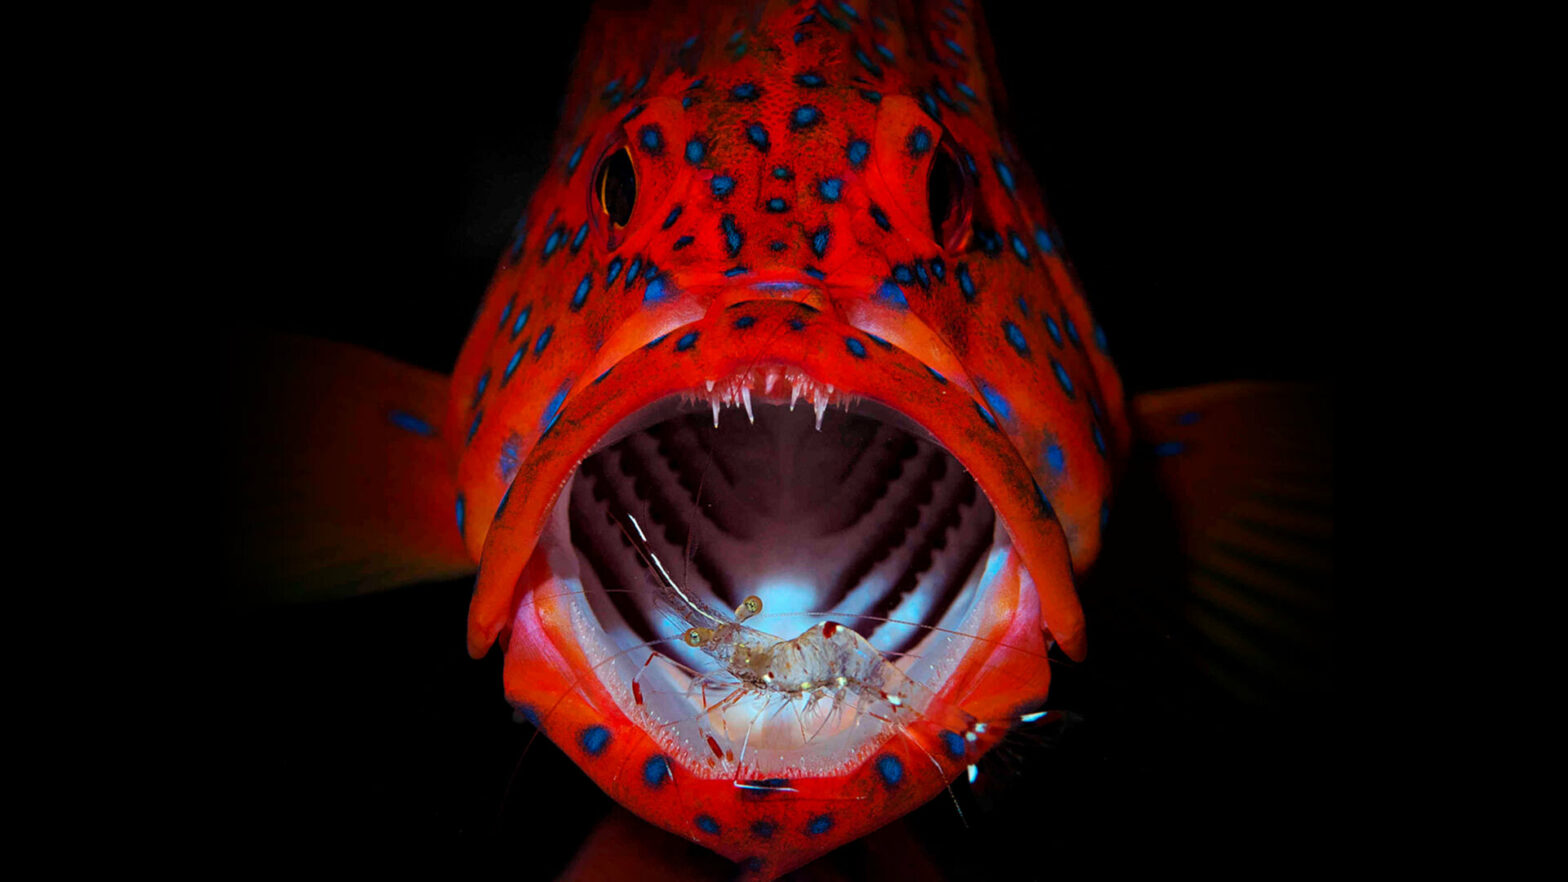 Incredible image of a cod enjoying some dental hygiene work from a shrimp scoops a gong in photography competition